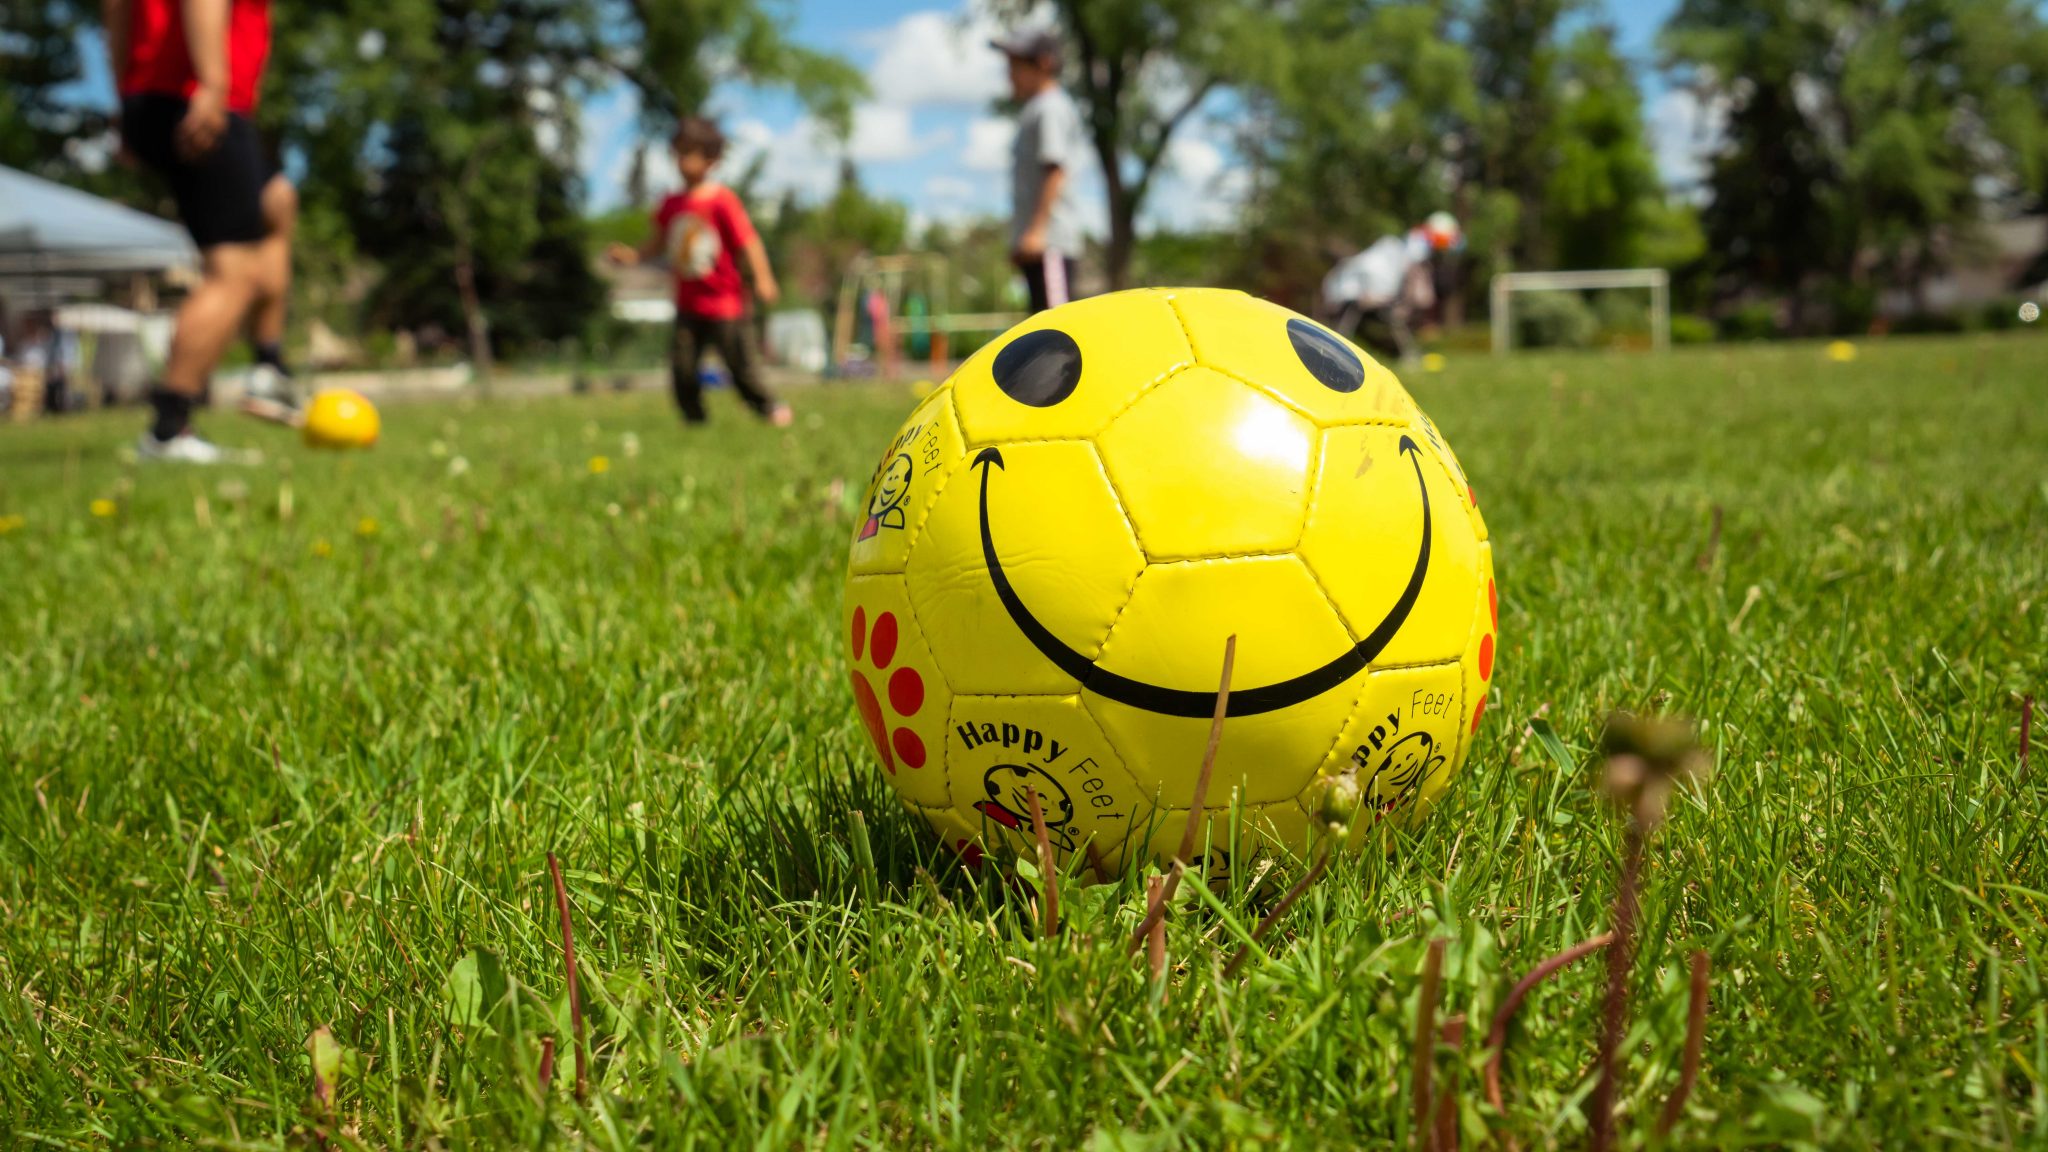 Soccer ball with a smiley face at a Neighbour Day event